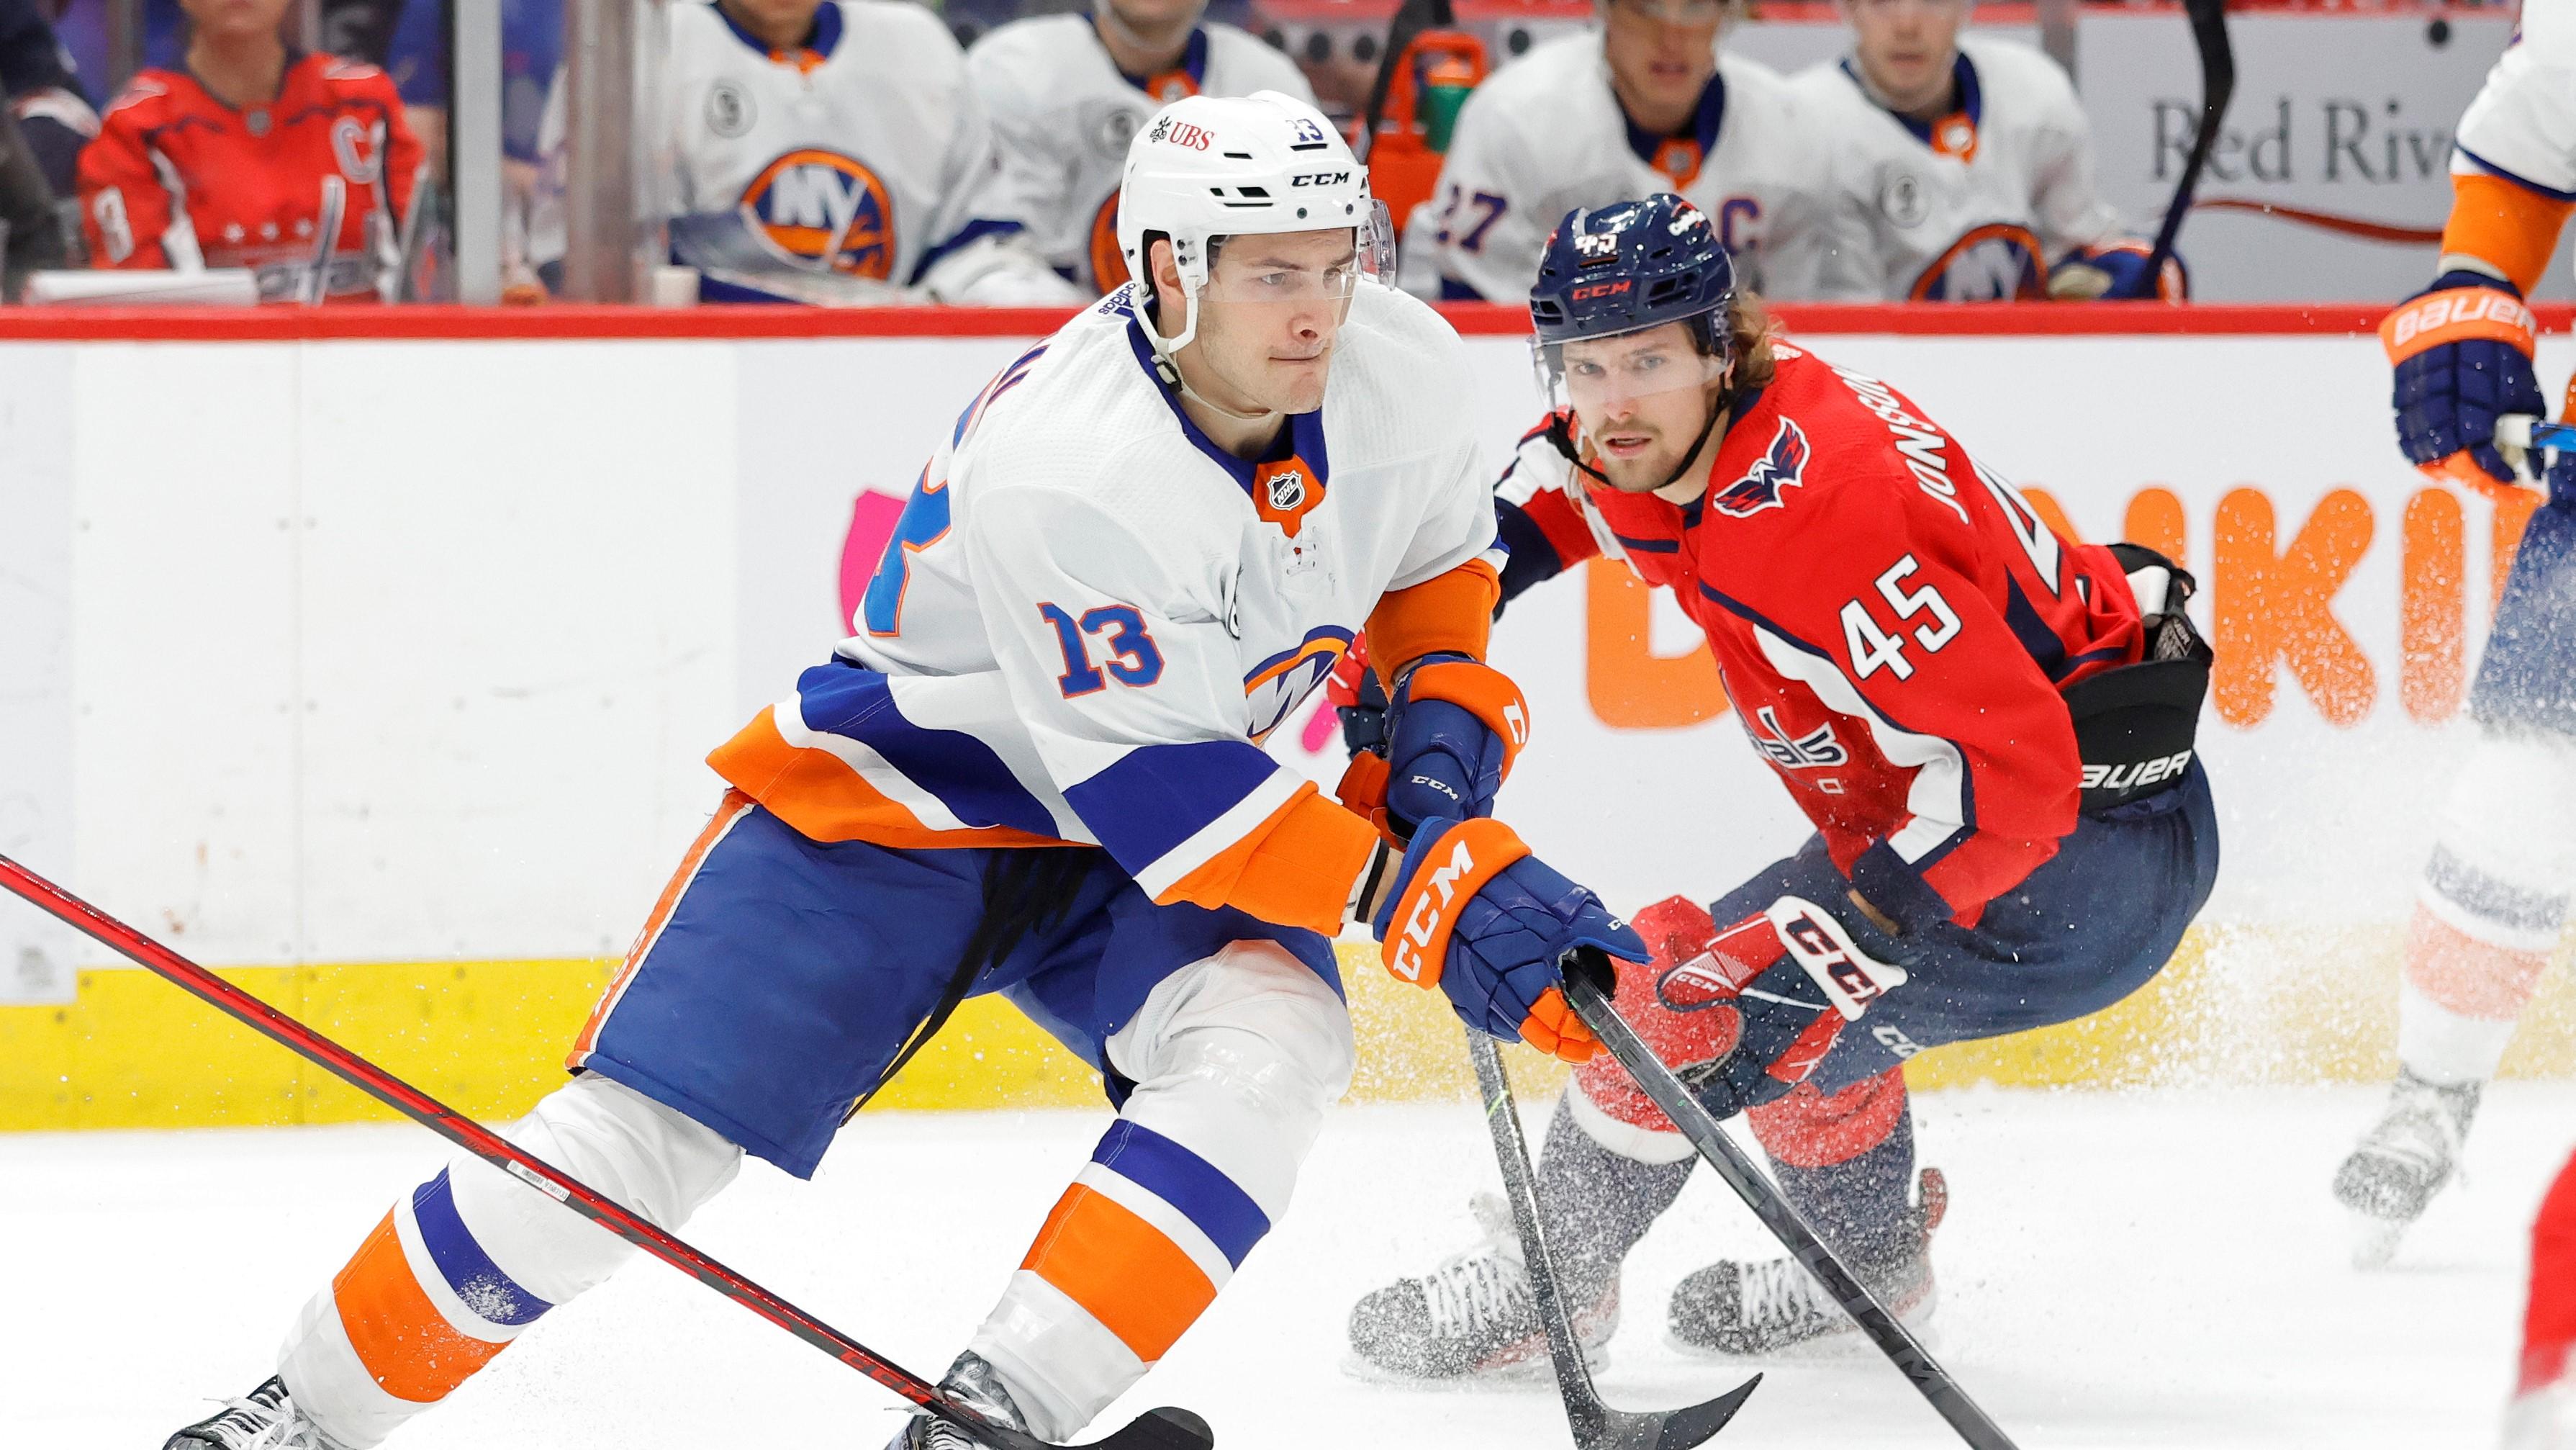 Mar 15, 2022; Washington, District of Columbia, USA; New York Islanders center Mathew Barzal (13) skates with the puck as Washington Capitals left wing Axel Jonsson-Fjallby (45) defends in the second period at Capital One Arena. / Geoff Burke-USA TODAY Sports